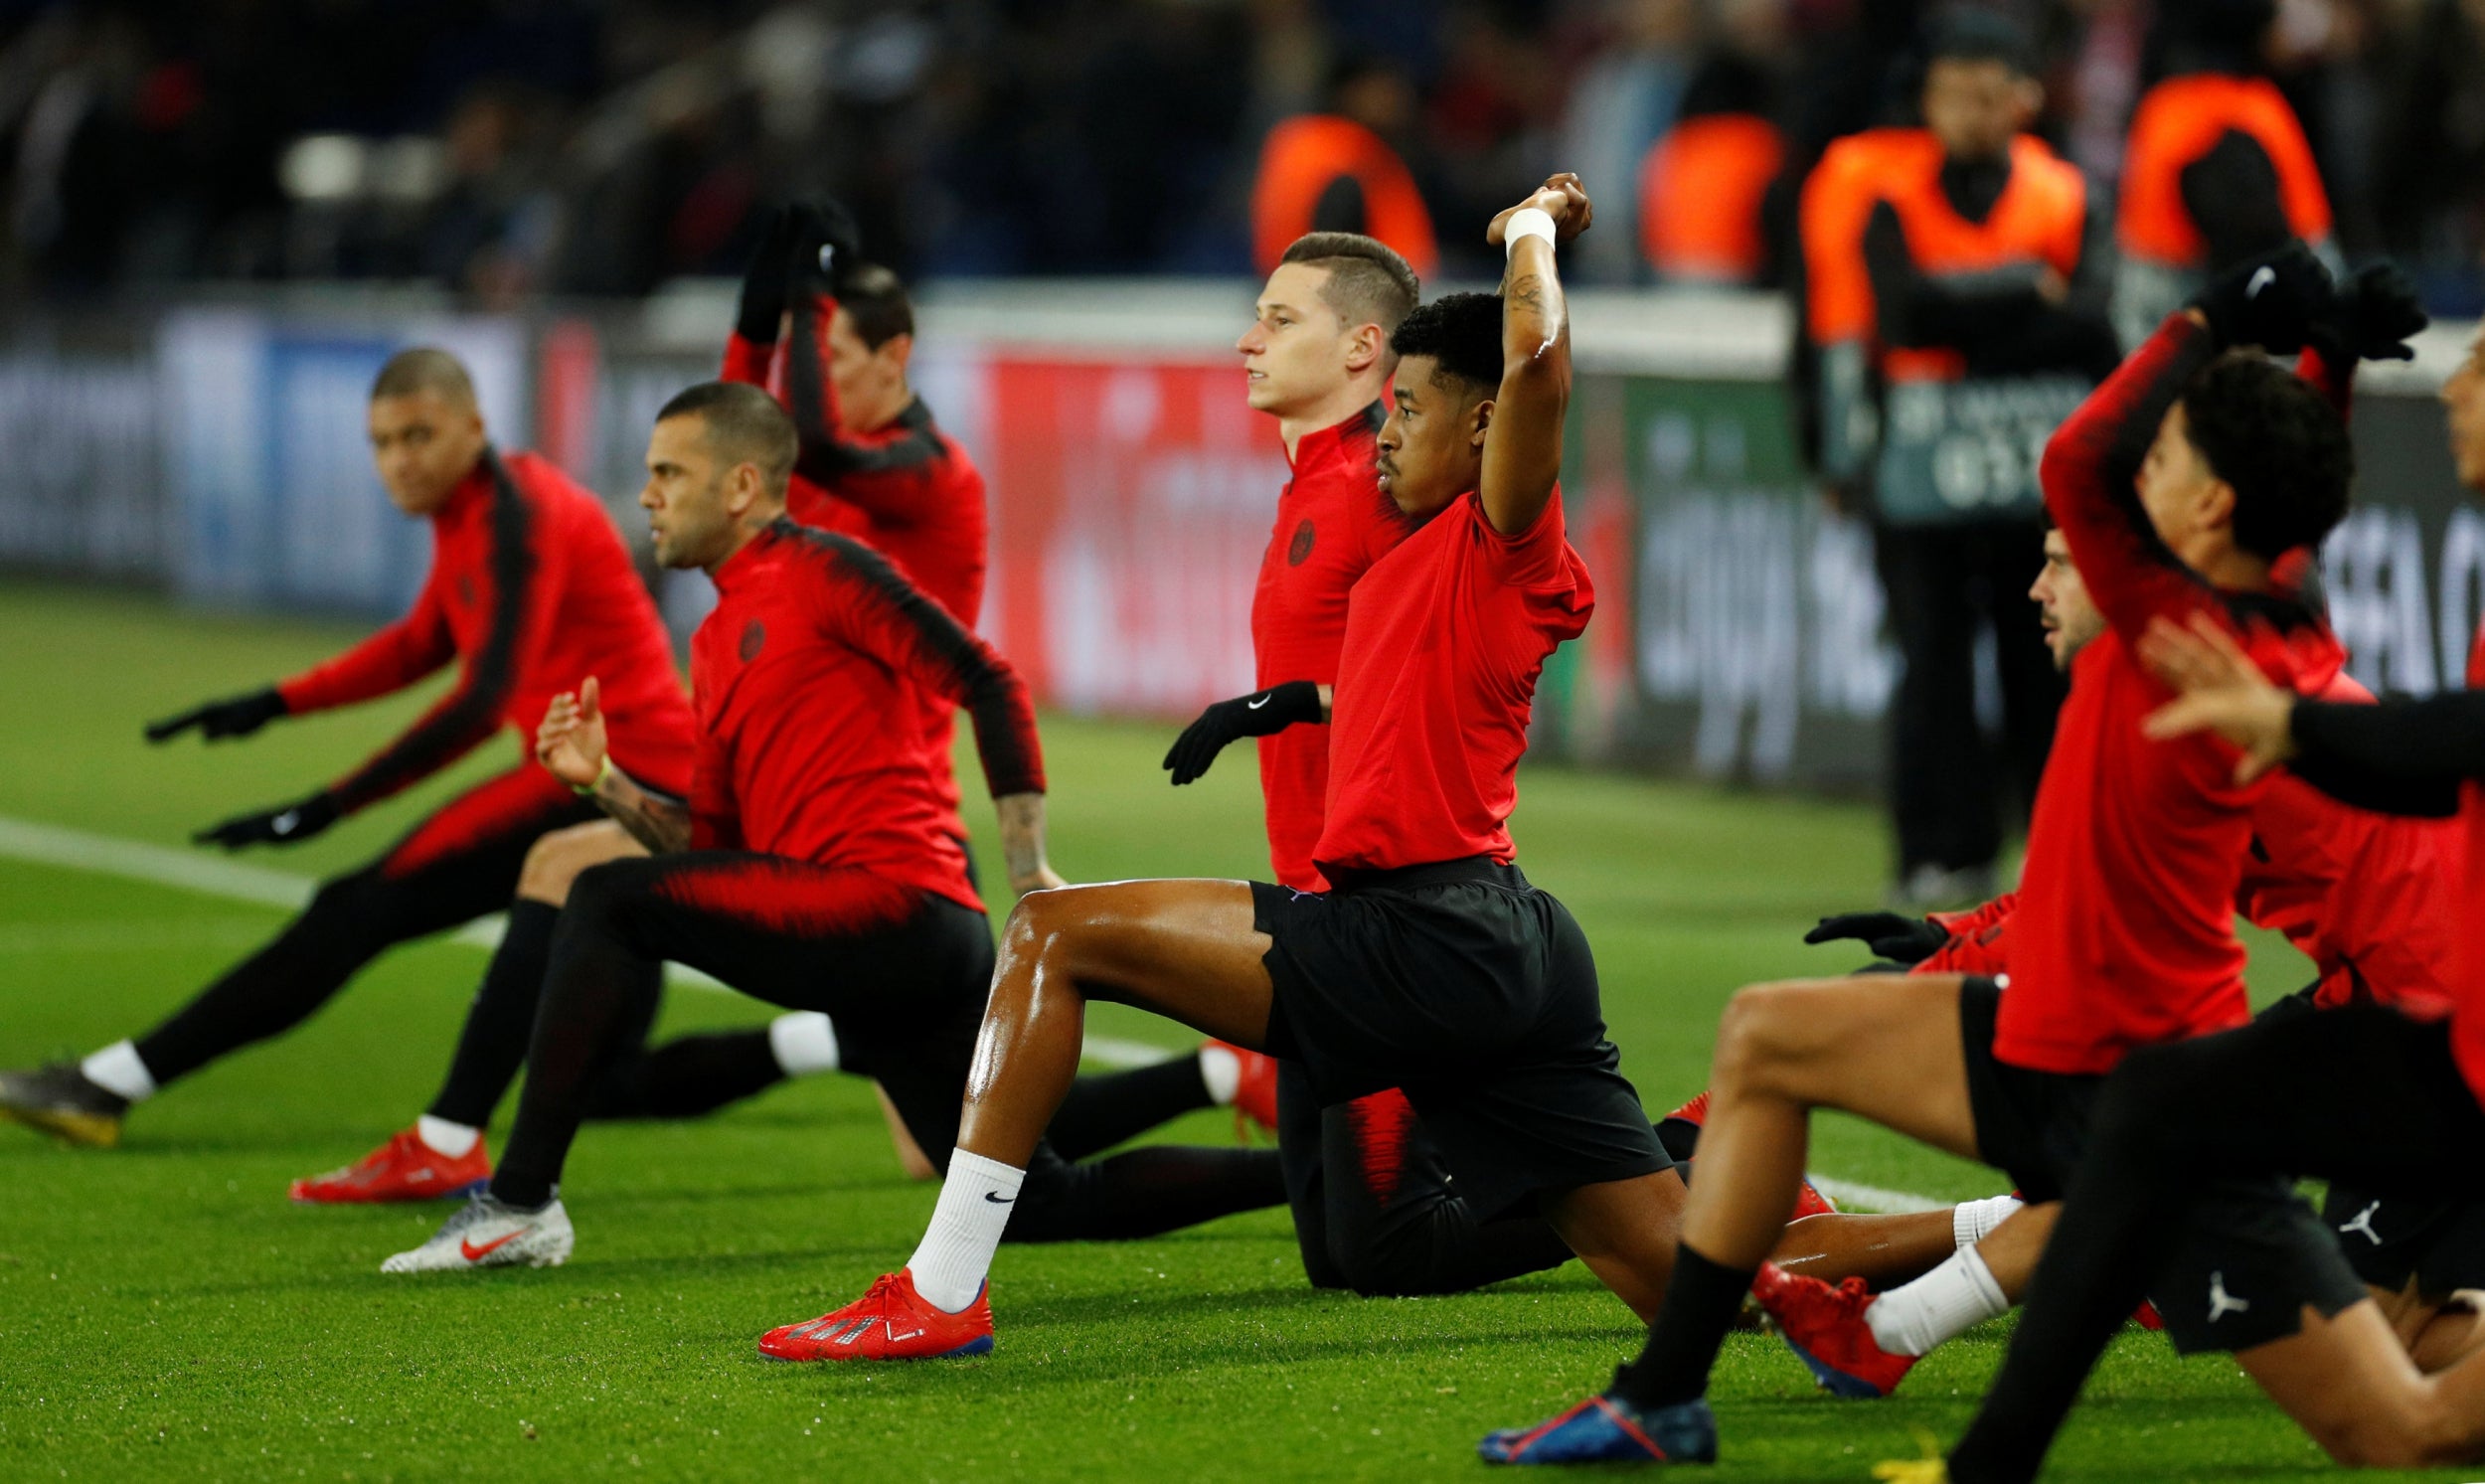 PSG vs Manchester United Jesse Lingard's incredible reaction after